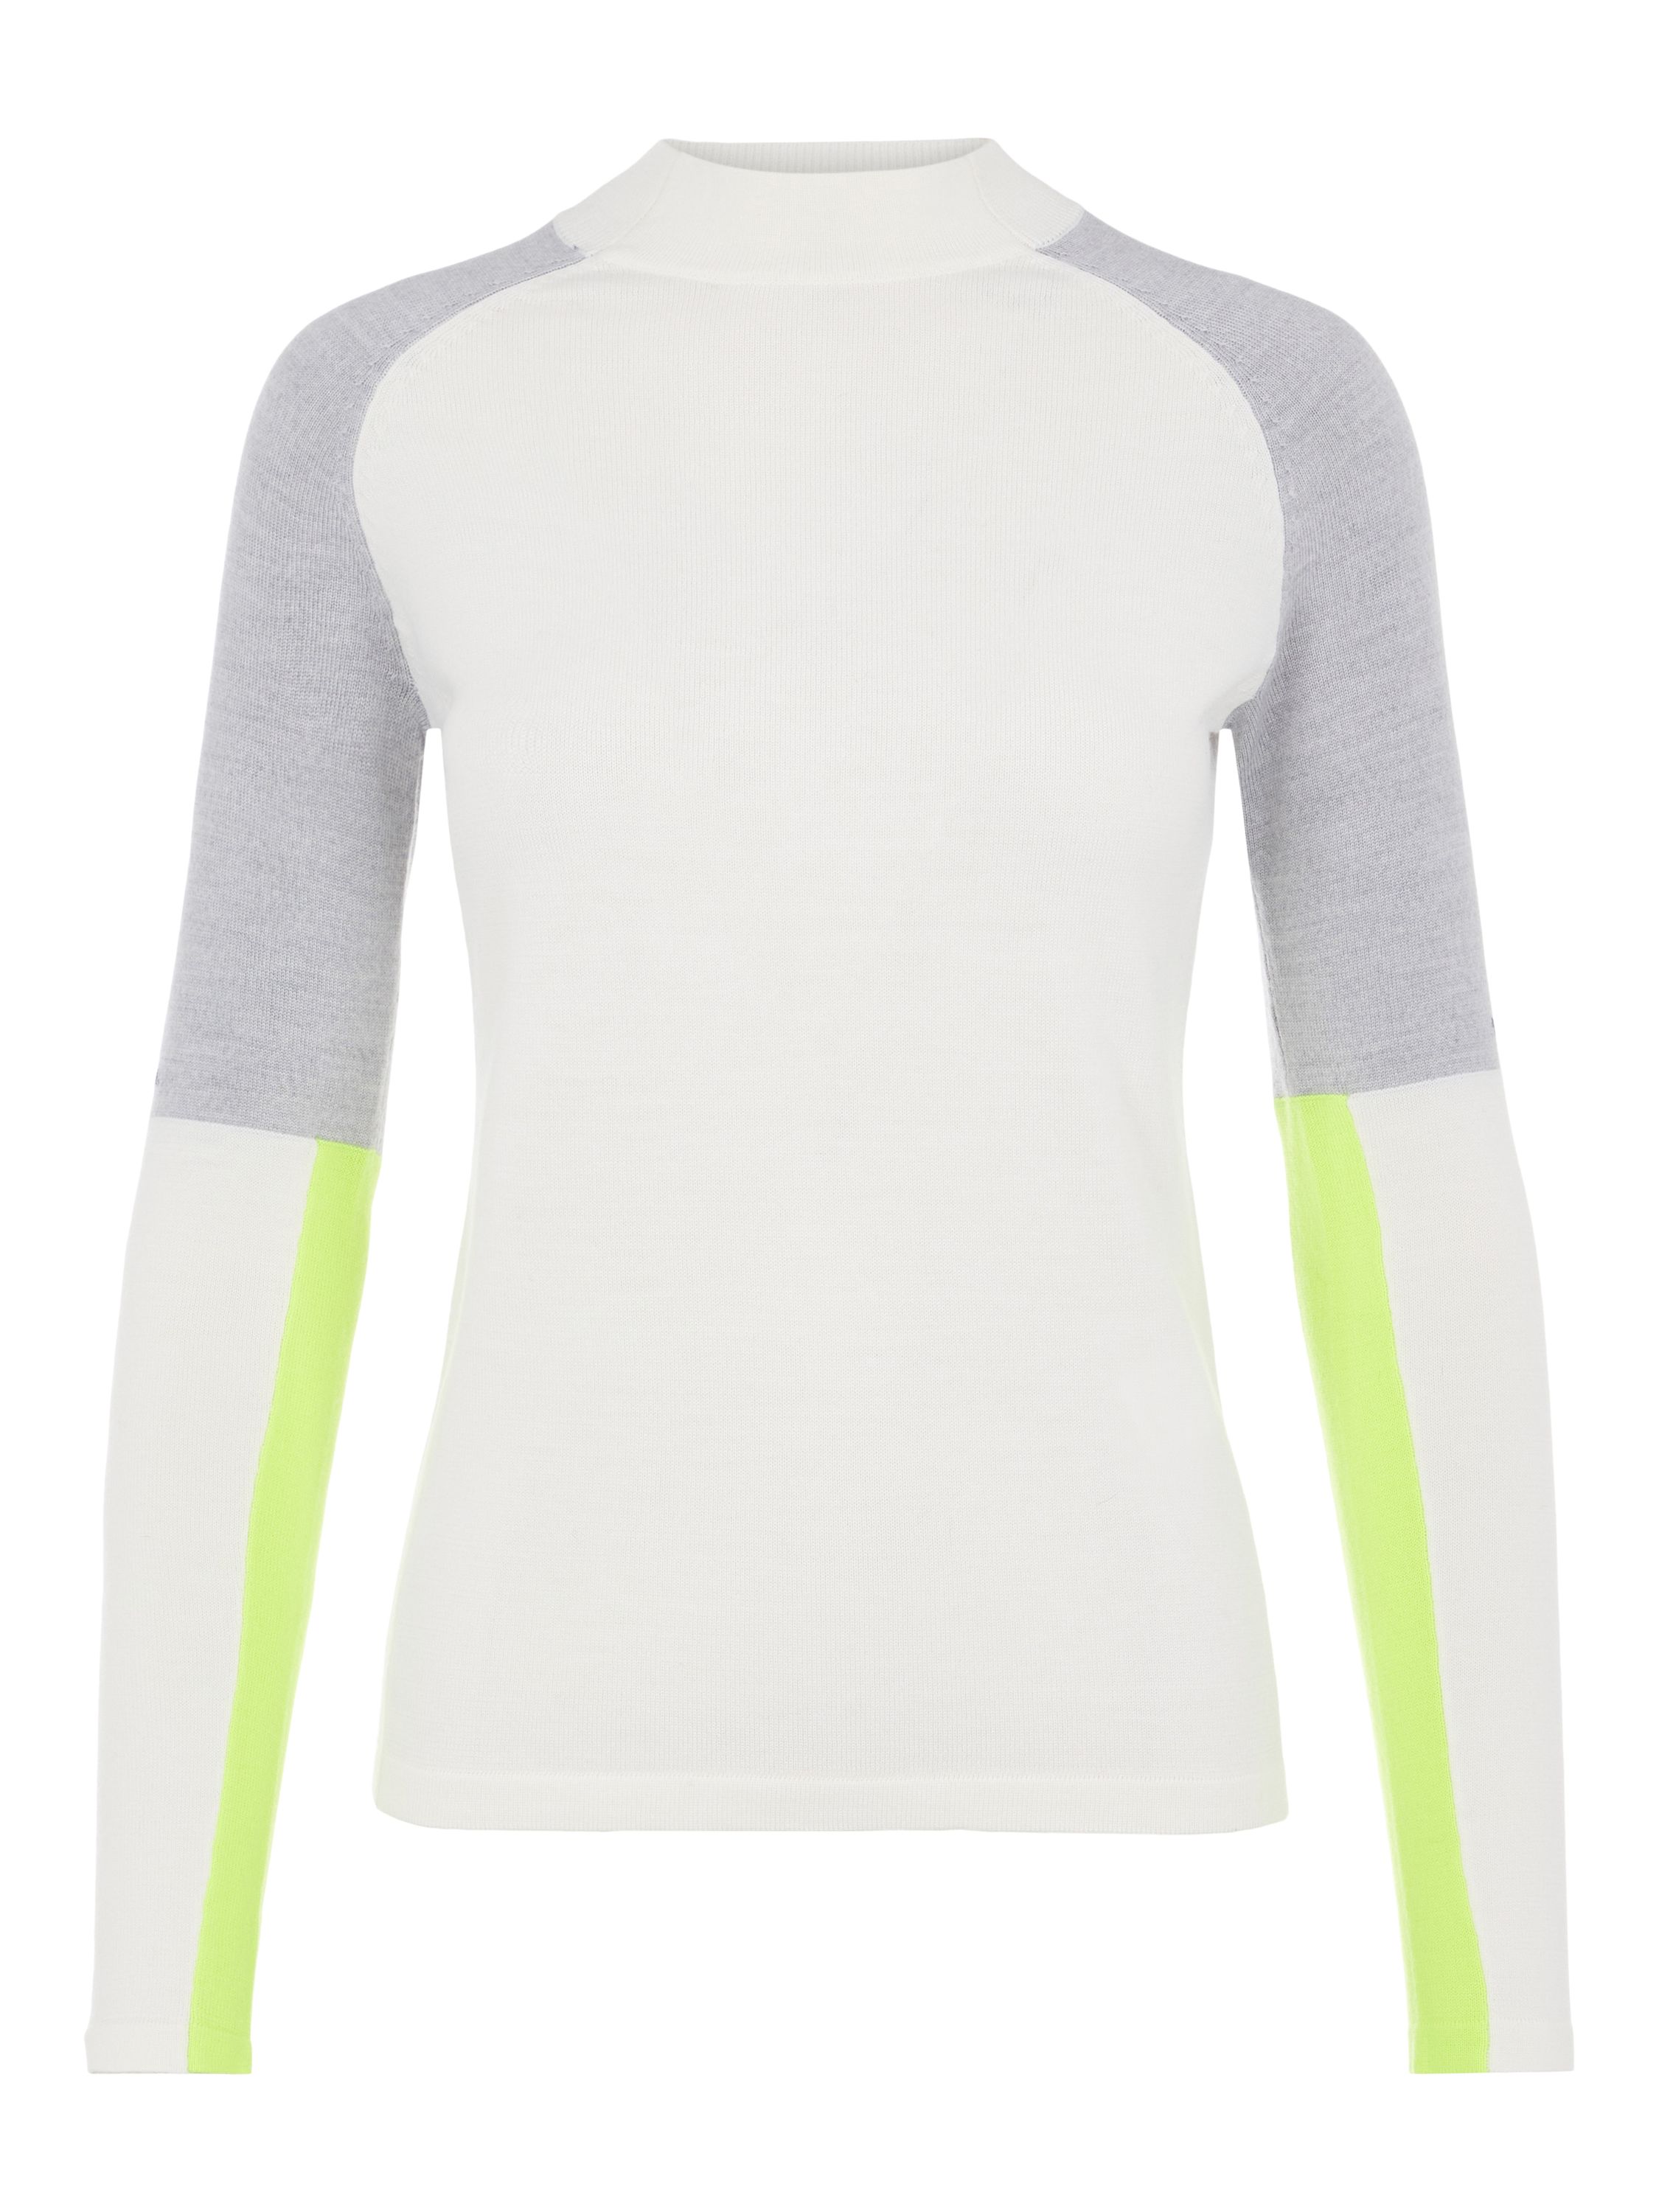 J.Lindeberg Leila Knitted Golf Sweater White